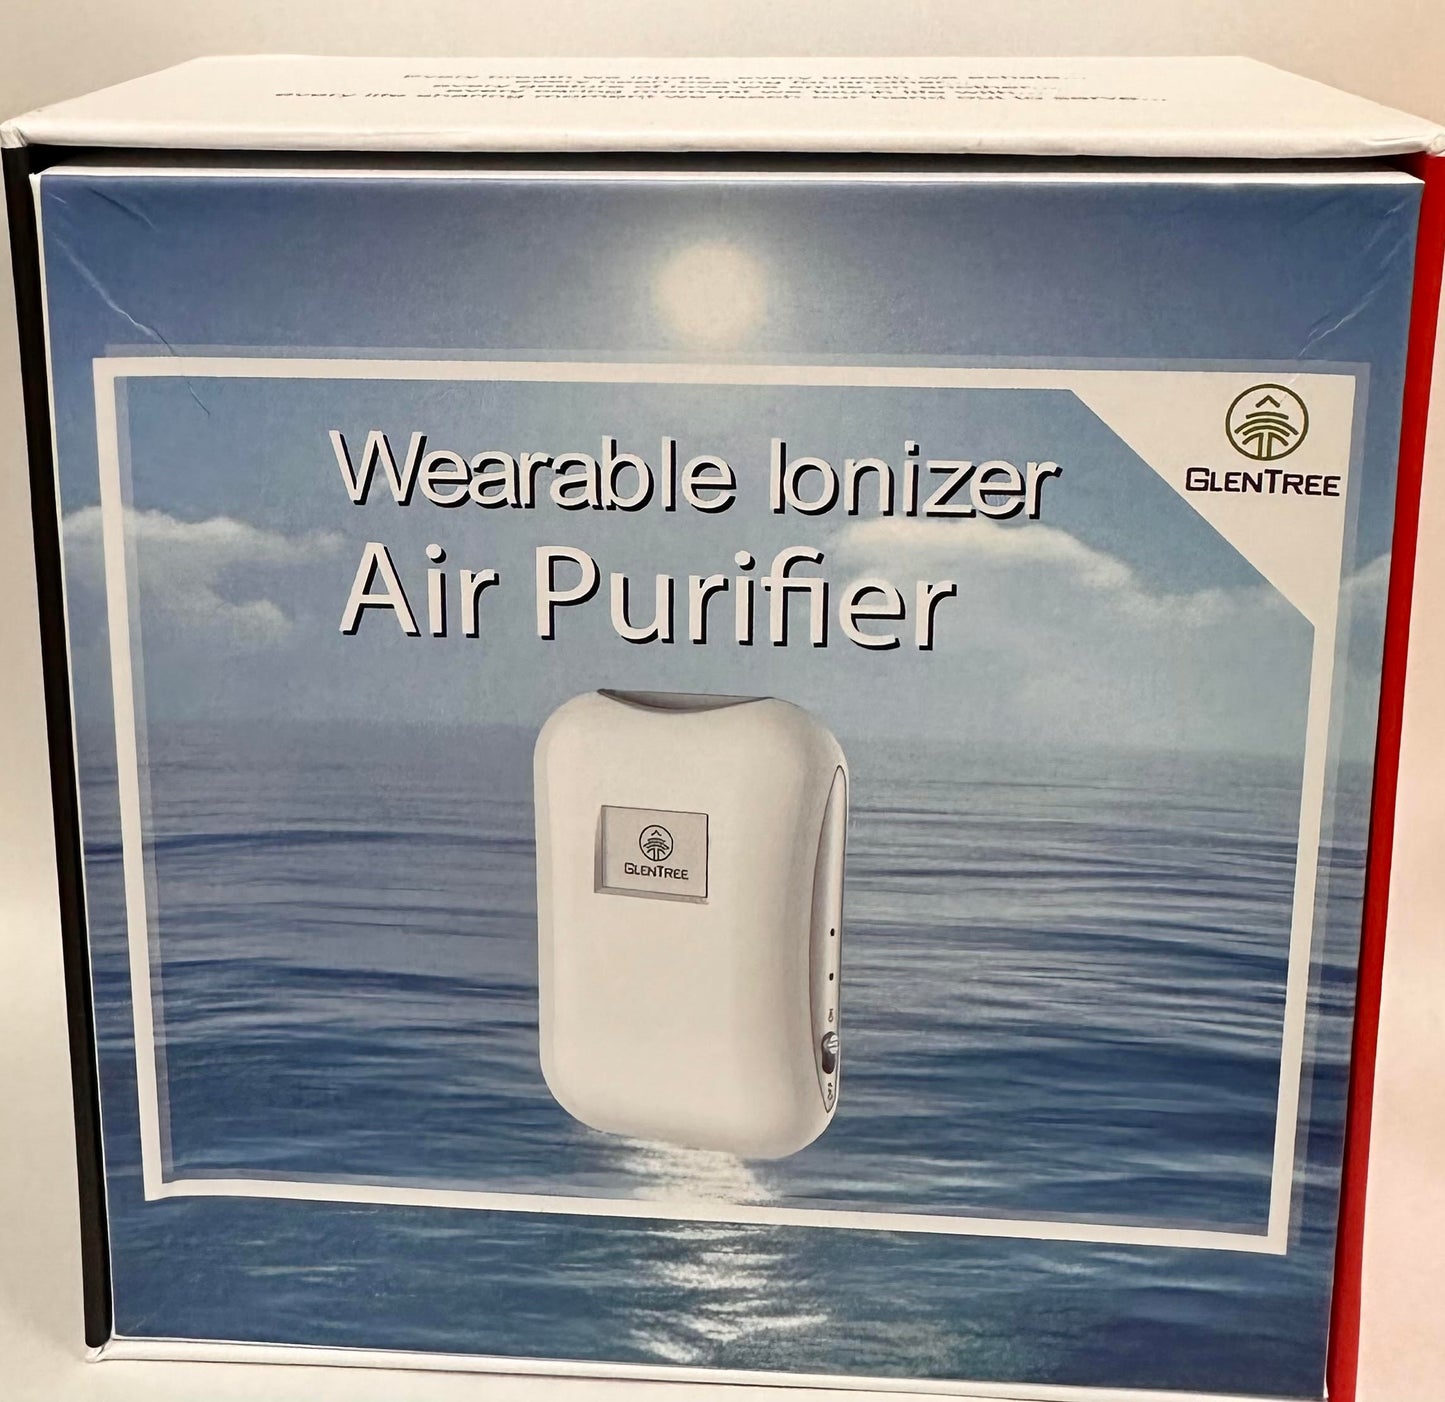 Personal Wearable Air Purifier